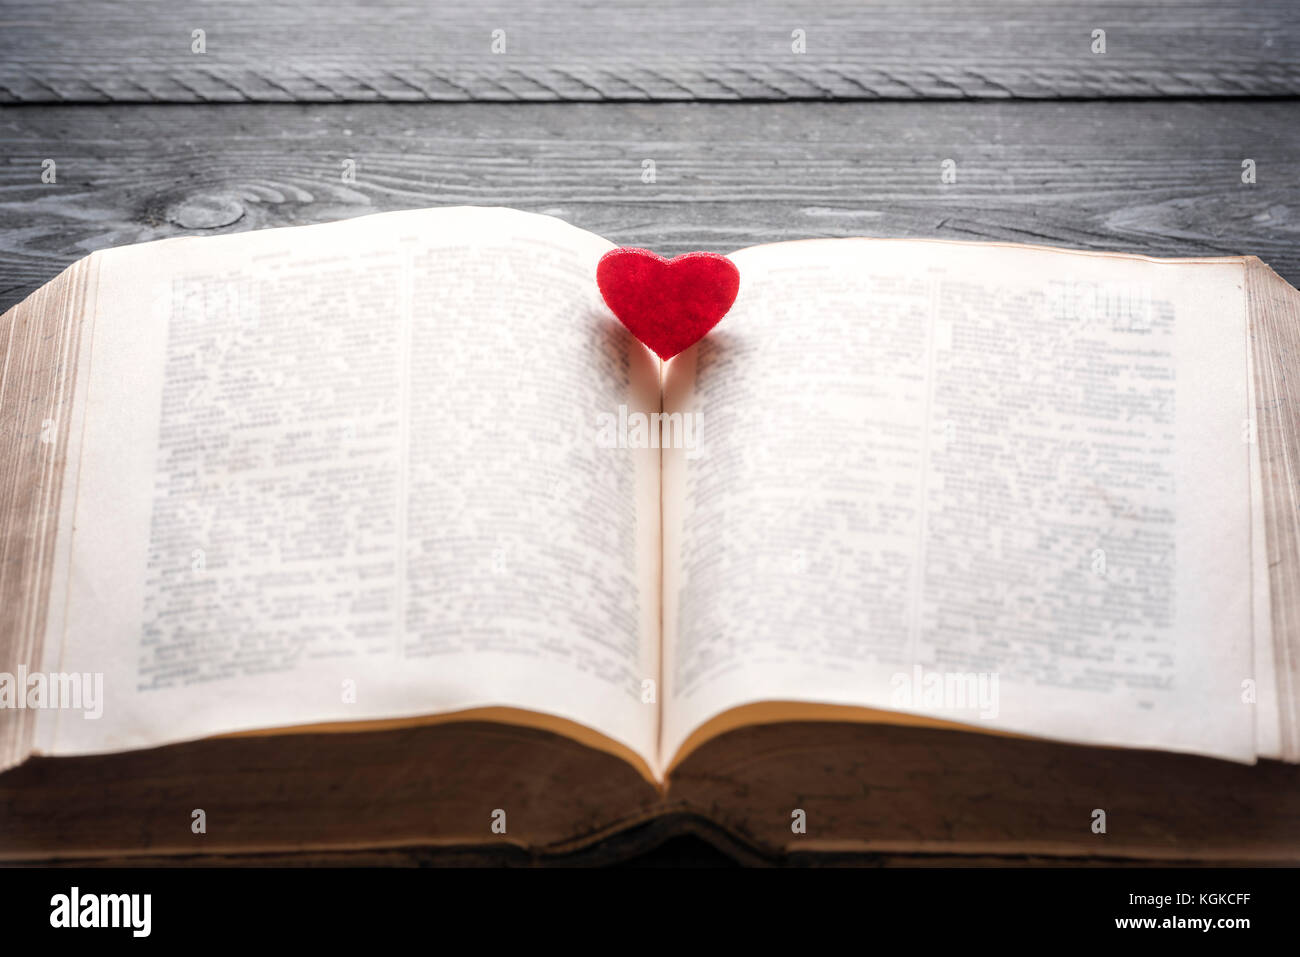 Education theme image with an antique open book with a red heart in the middle of it, on a vintage black table. A concept for love of learning, readin Stock Photo